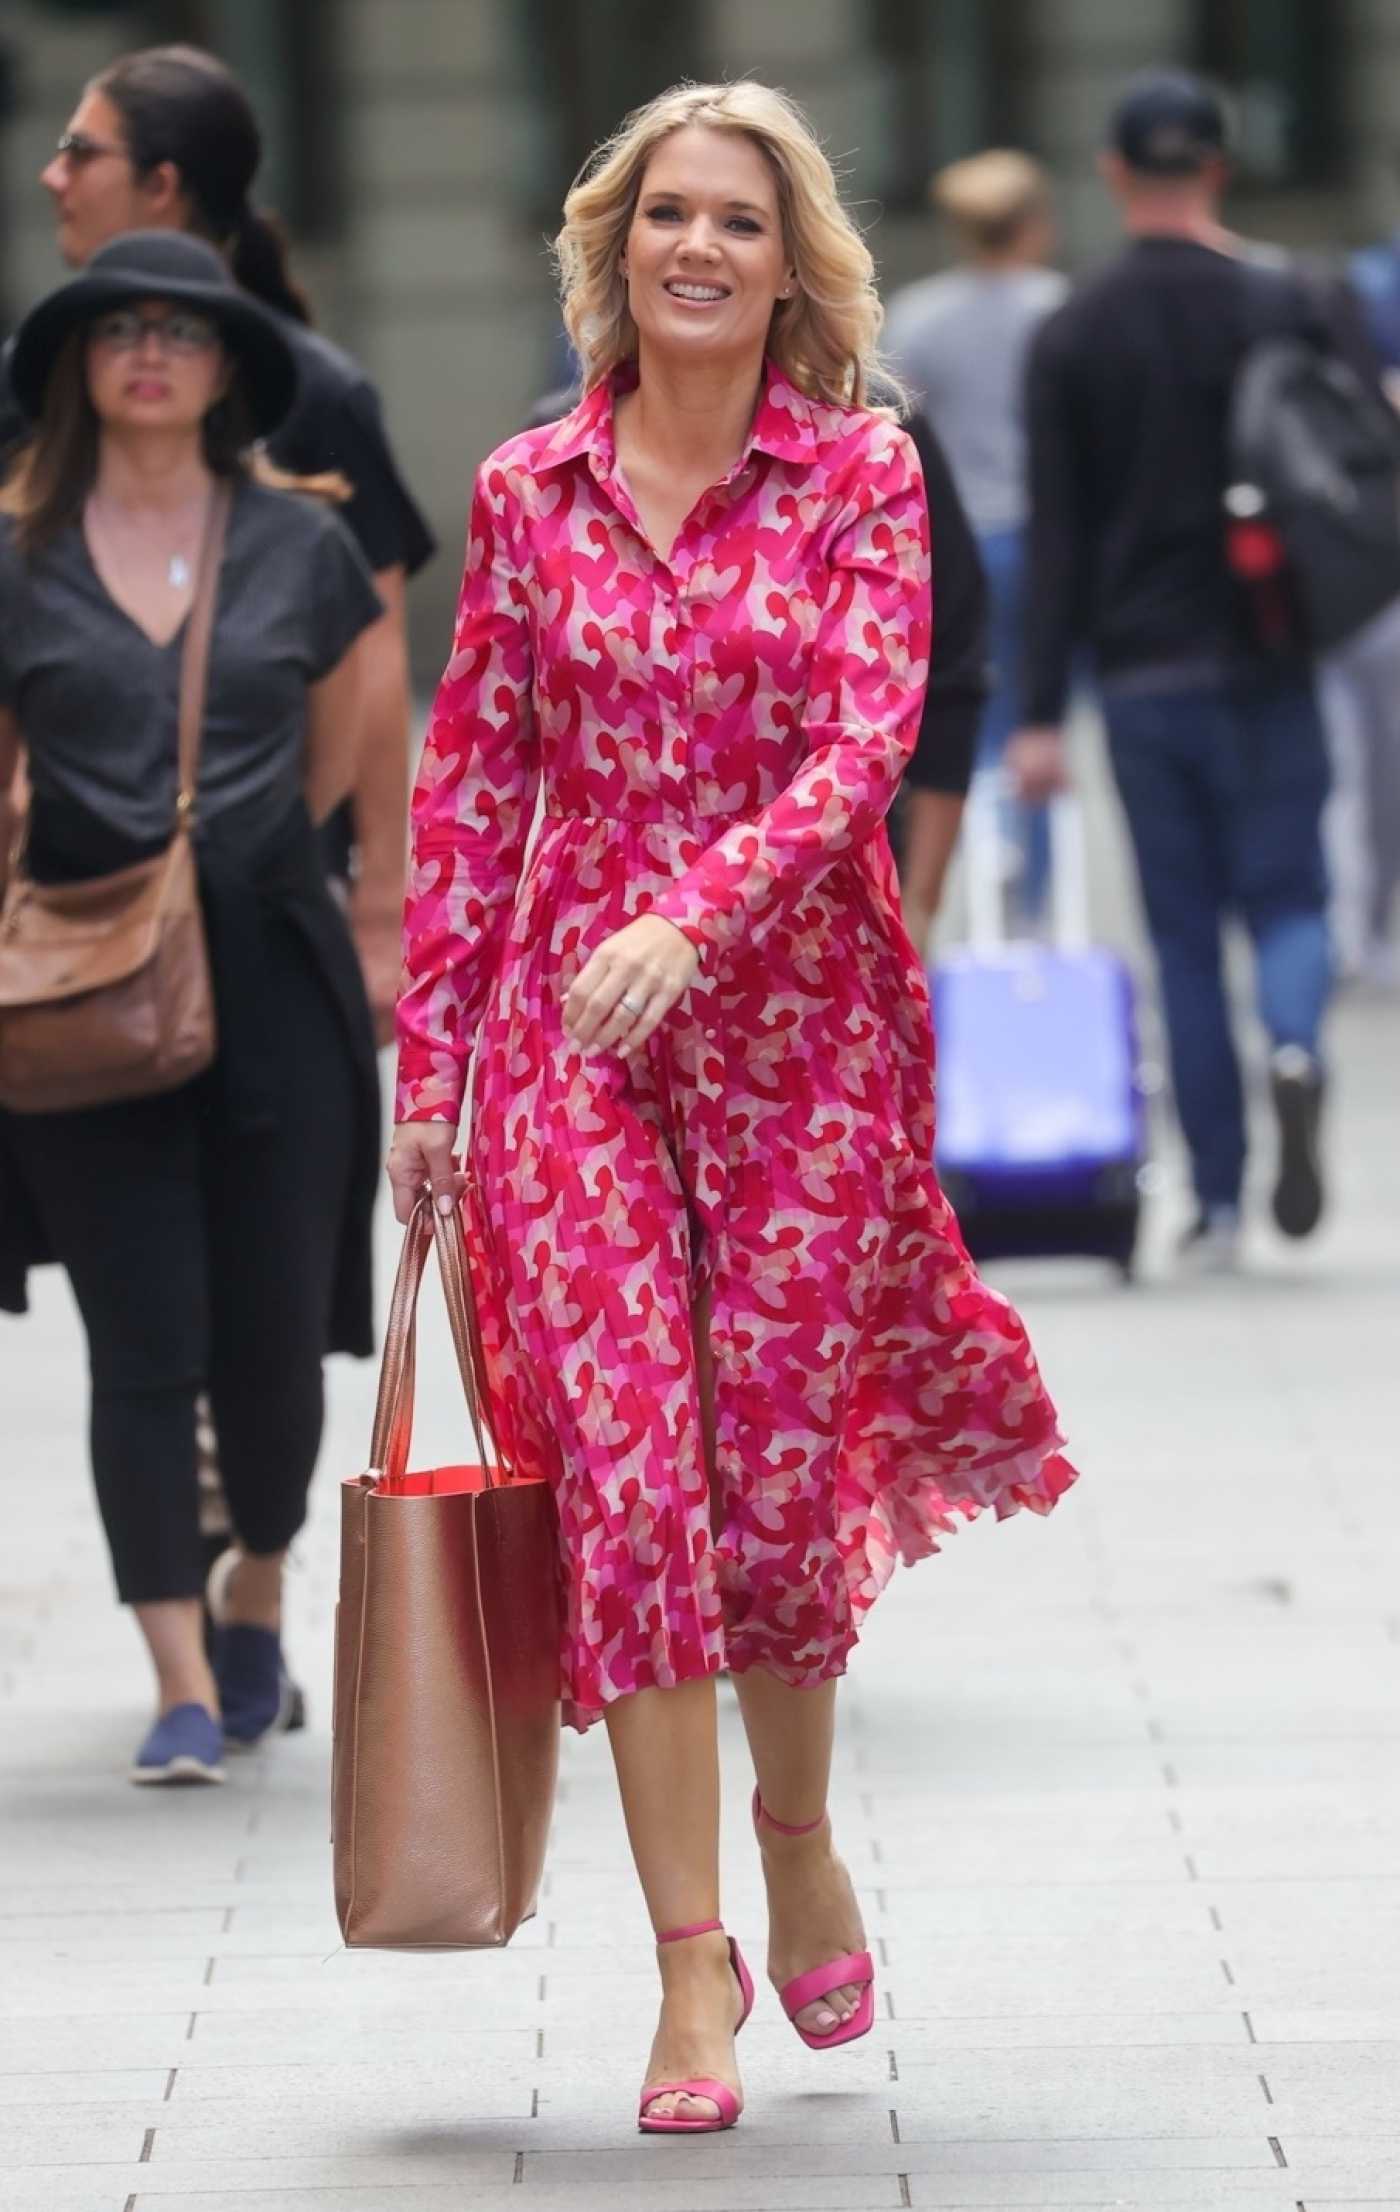 Charlotte Hawkins in a Red Patterned Dress Arrives at the Global Studios in London 06/10/2022